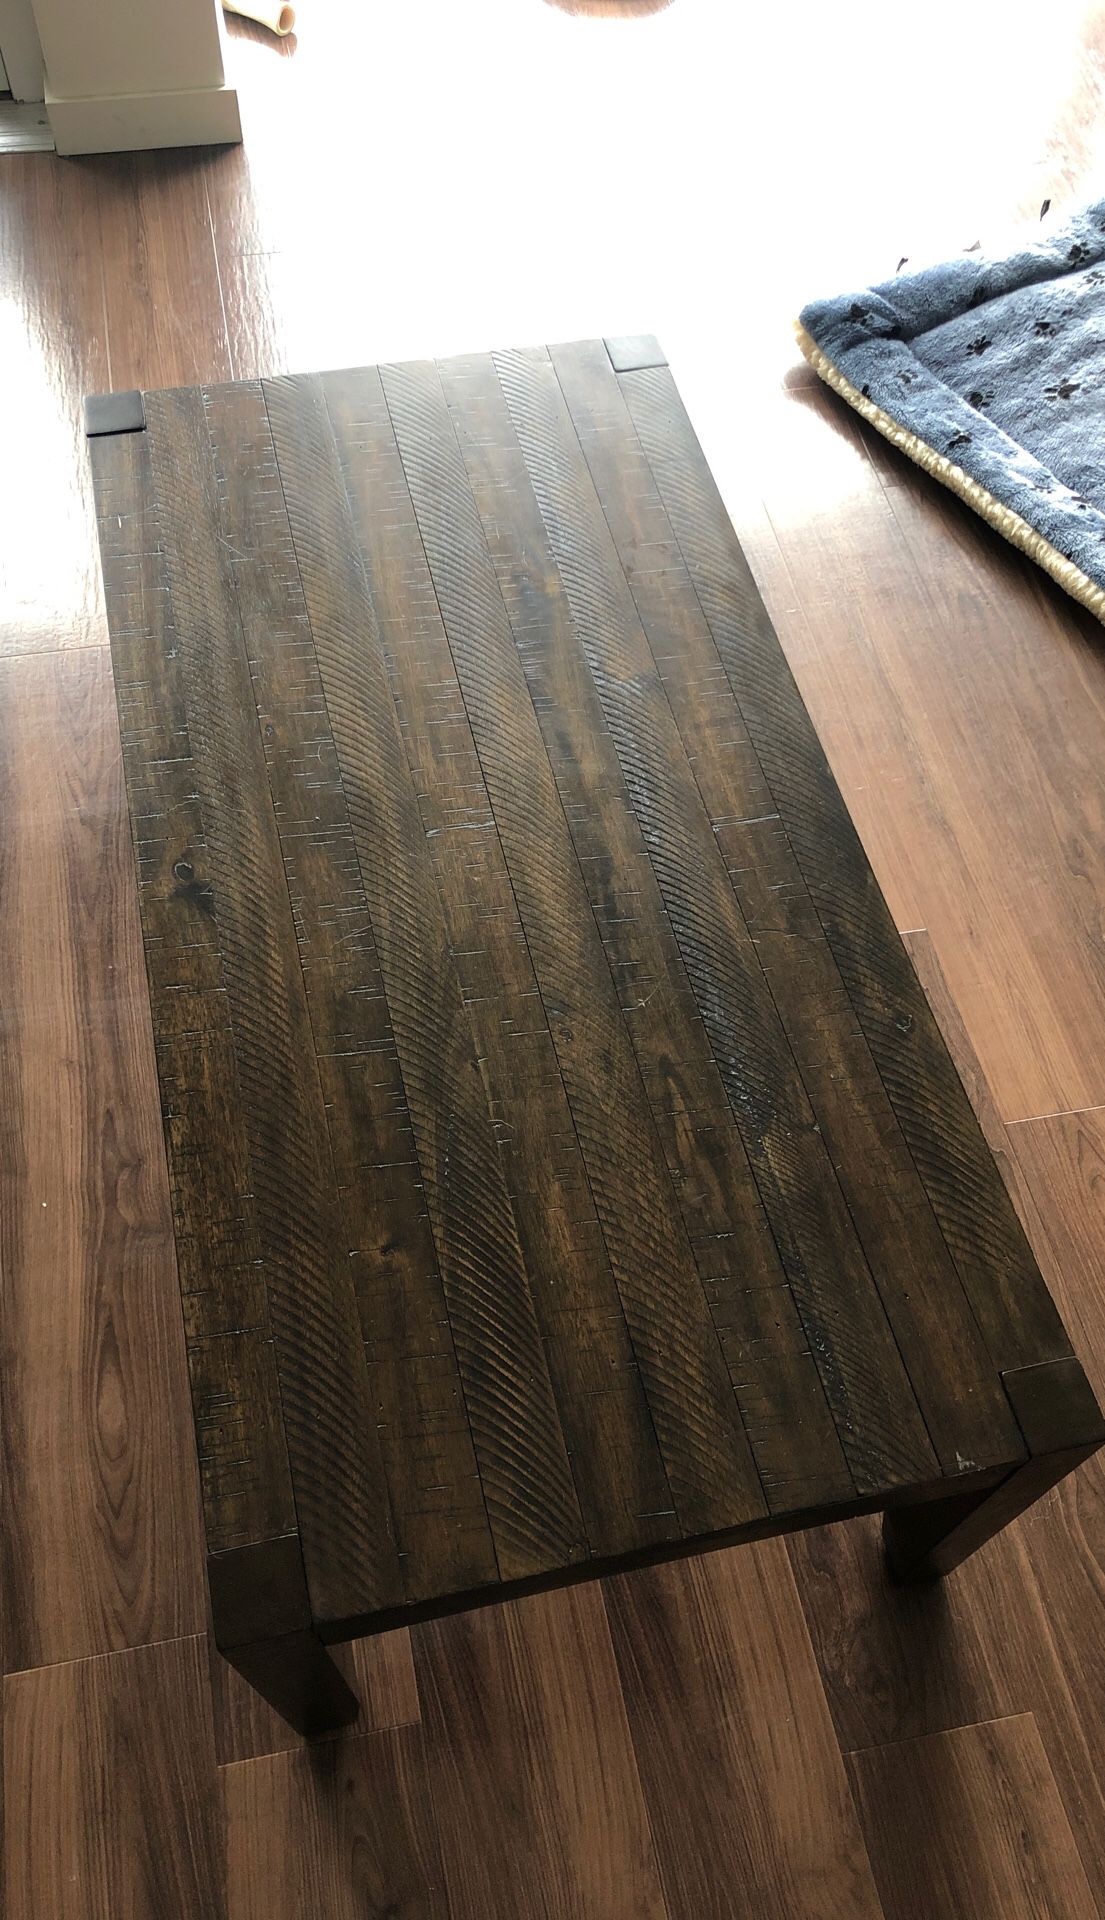 Matching coffee table with 2 end tables